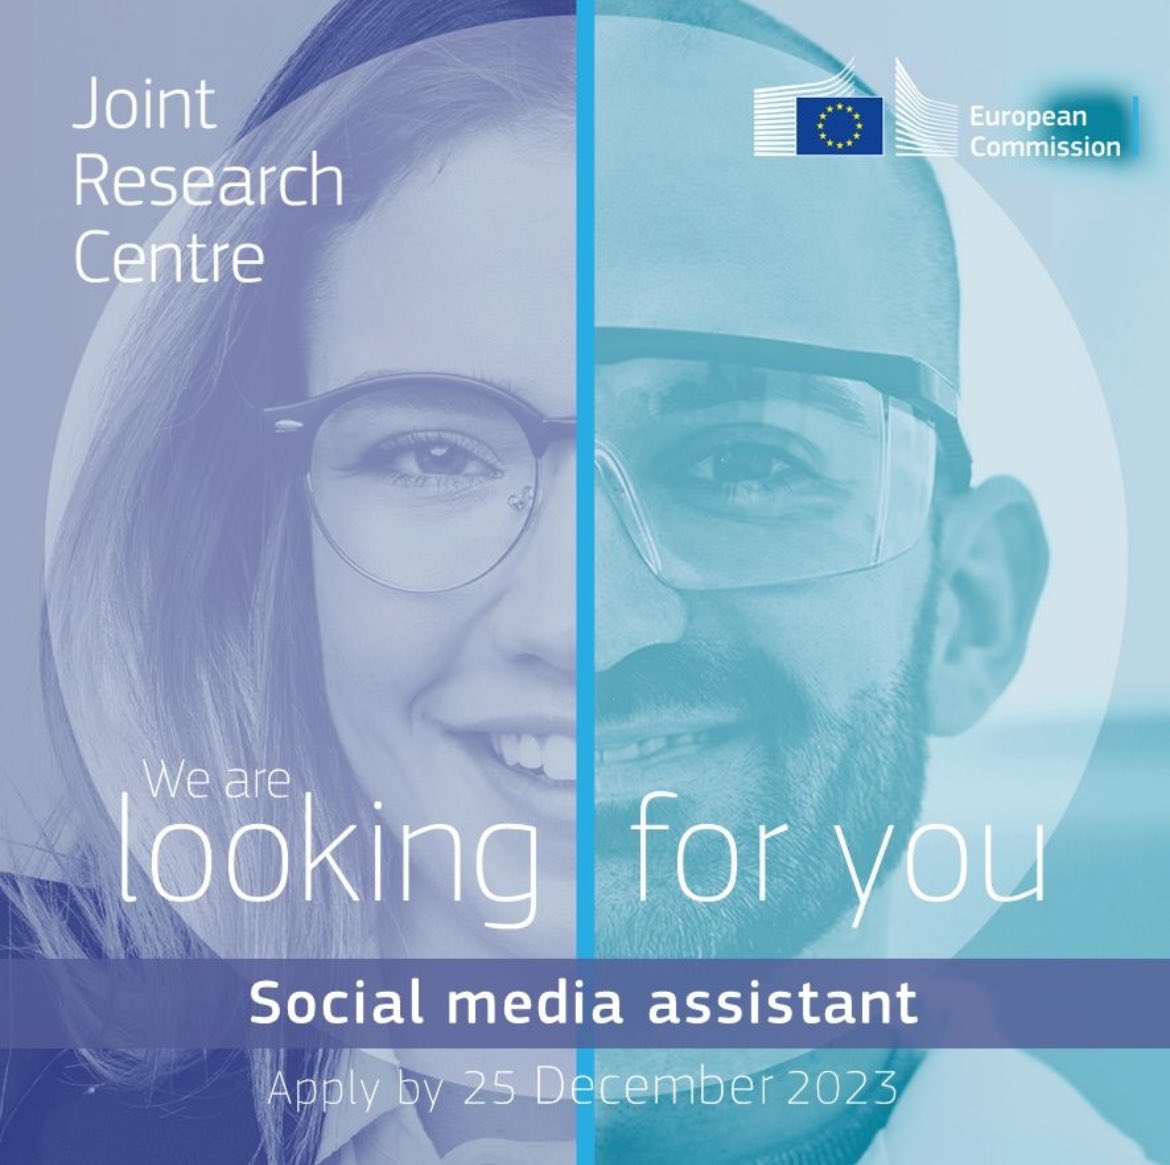 The EU Joint Research Centre is looking for a #SocialMedia assistant!

If you love science and have experience in social media, this job is for you.

📍 Based in Brussels

📆 Apply by 25 Dec

All information and application: europa.eu/!JpvwW6 

#EUScienceJobs #EUCareers